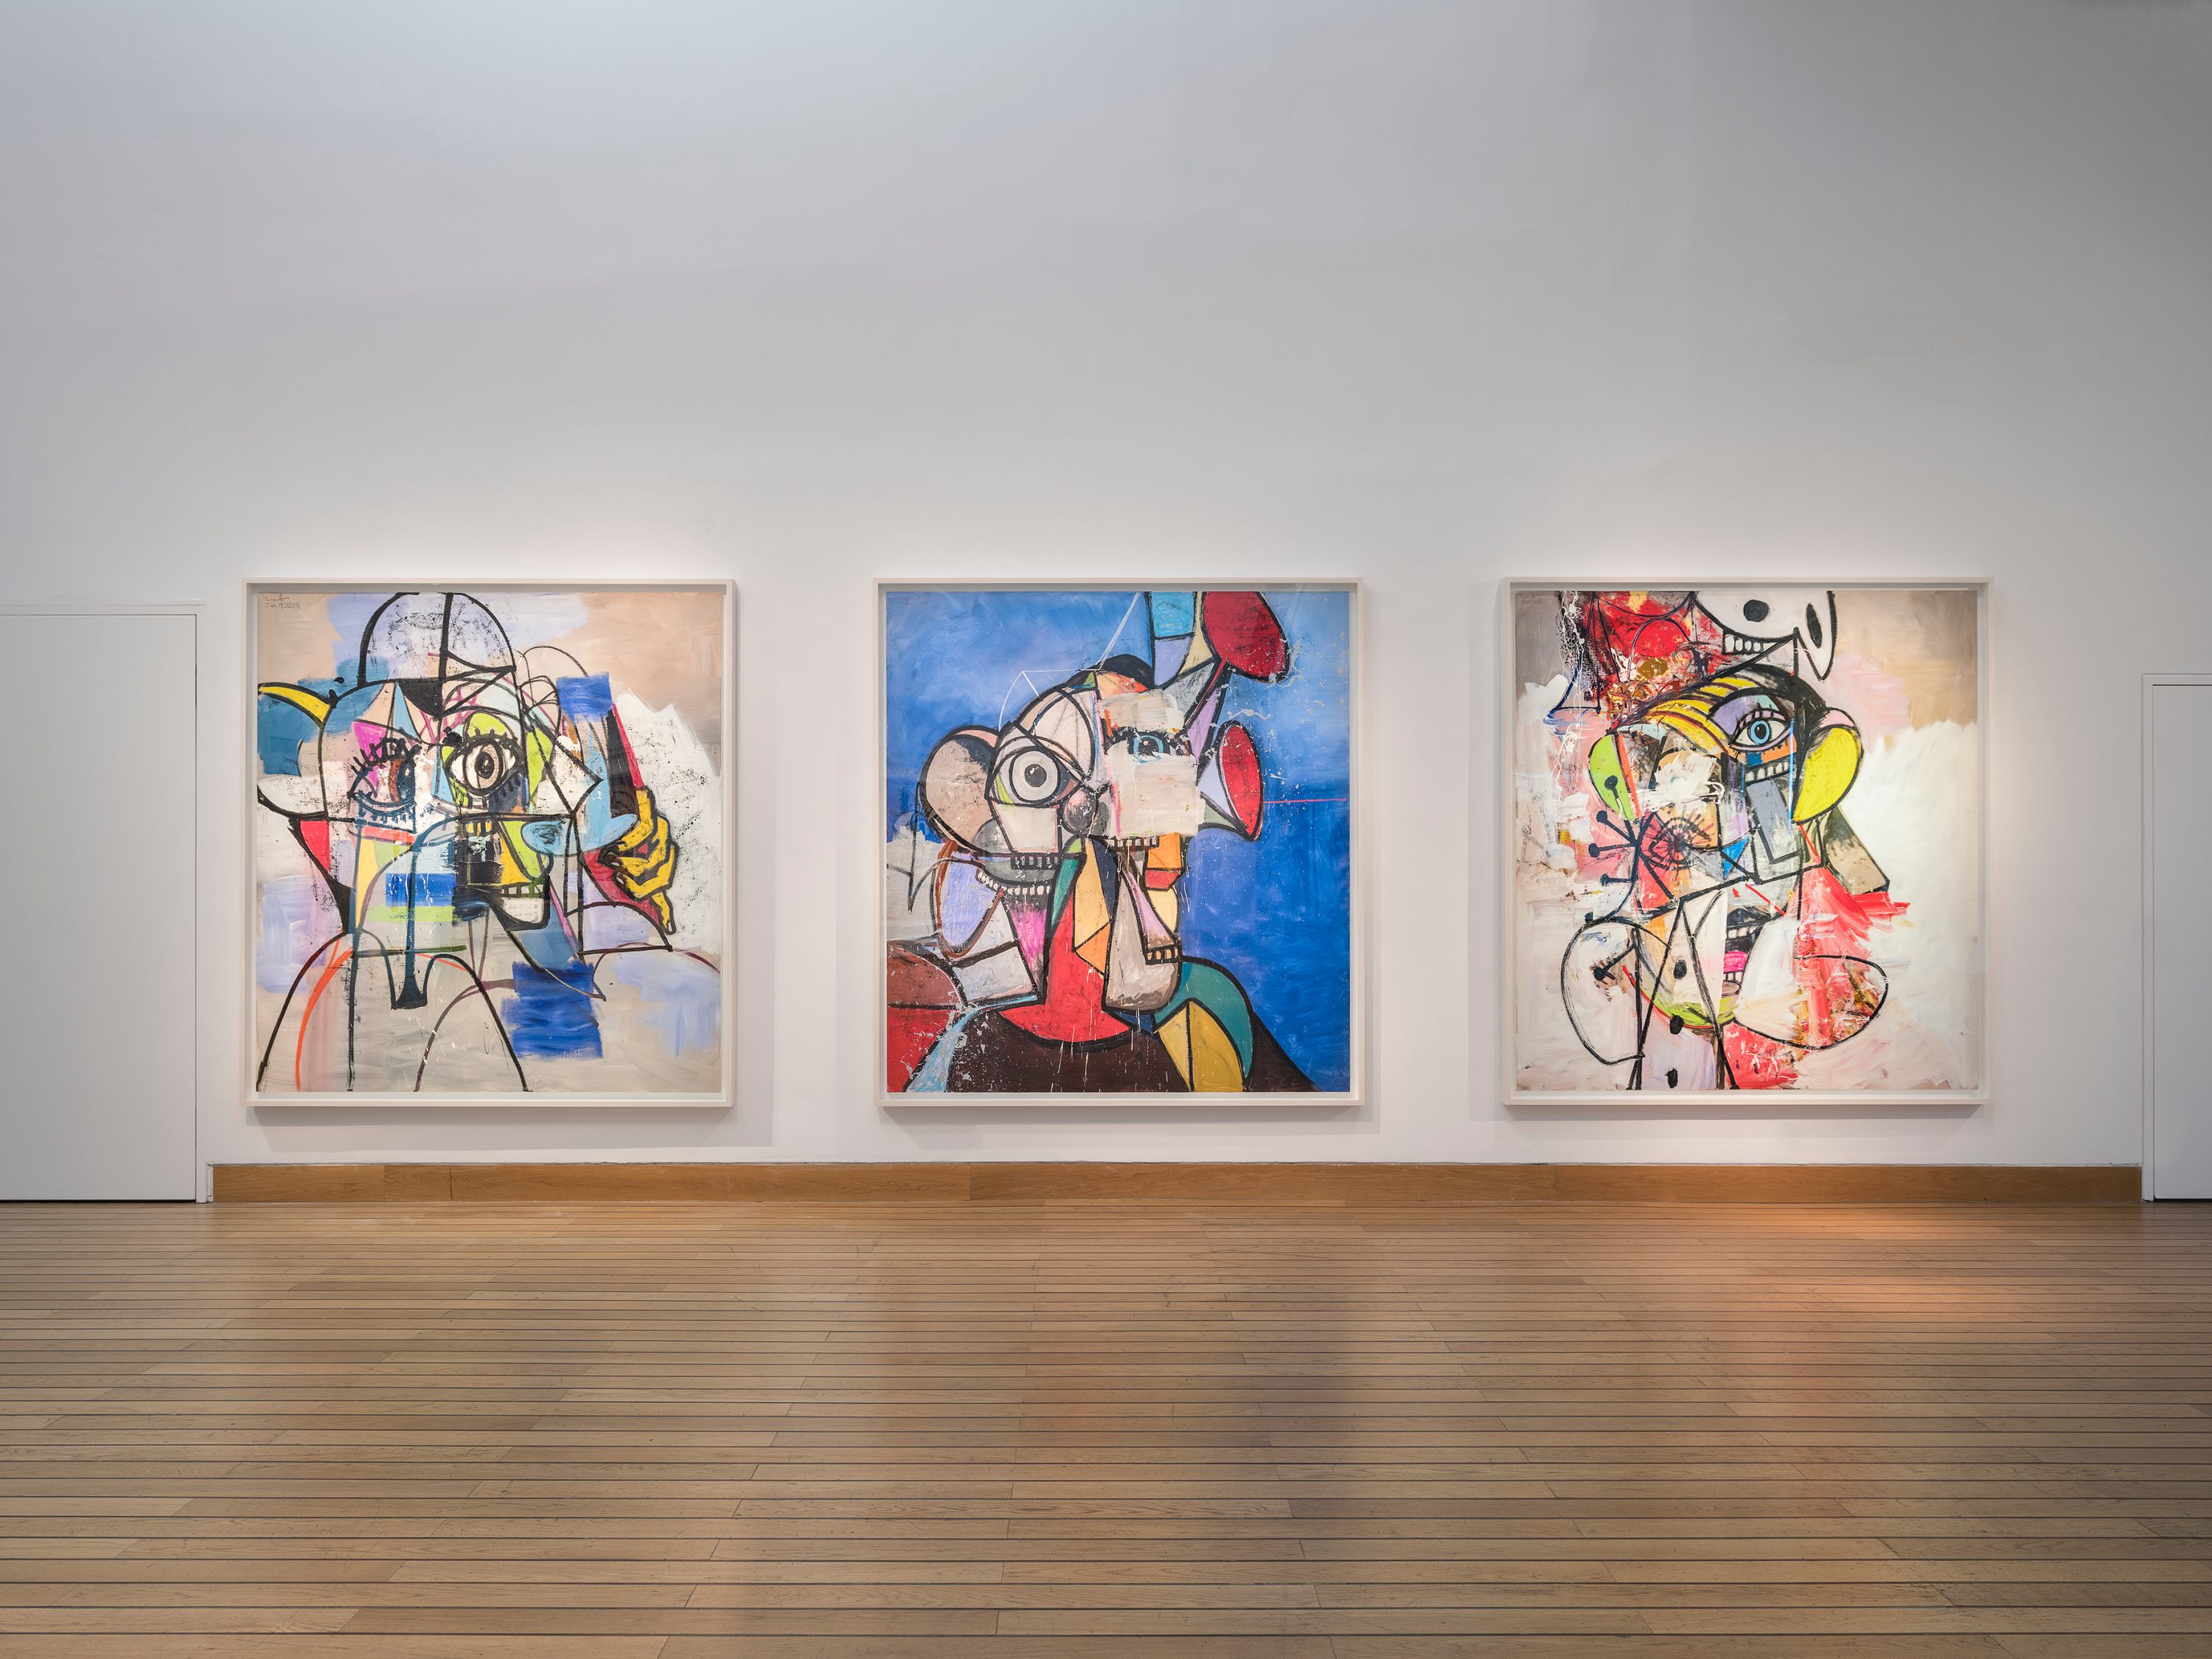 The rise of George Condo in the world of multimillion dollar auction sales